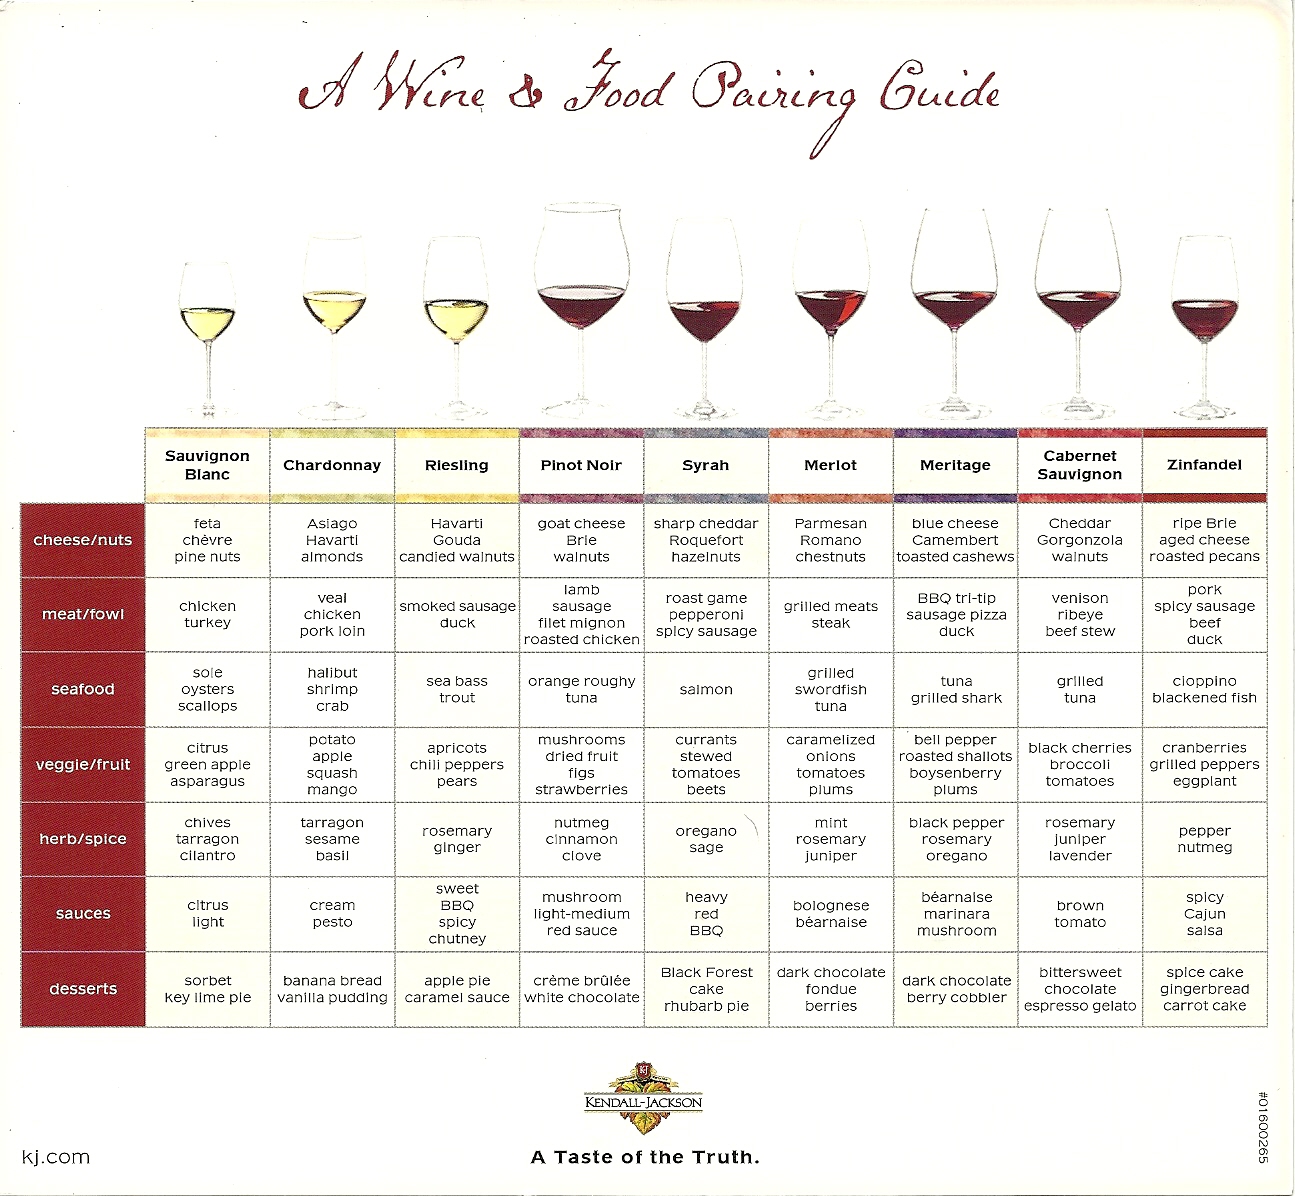 Let's Do Dinner Club! Red, White or Pink? Some Notes on Wine Pairing.